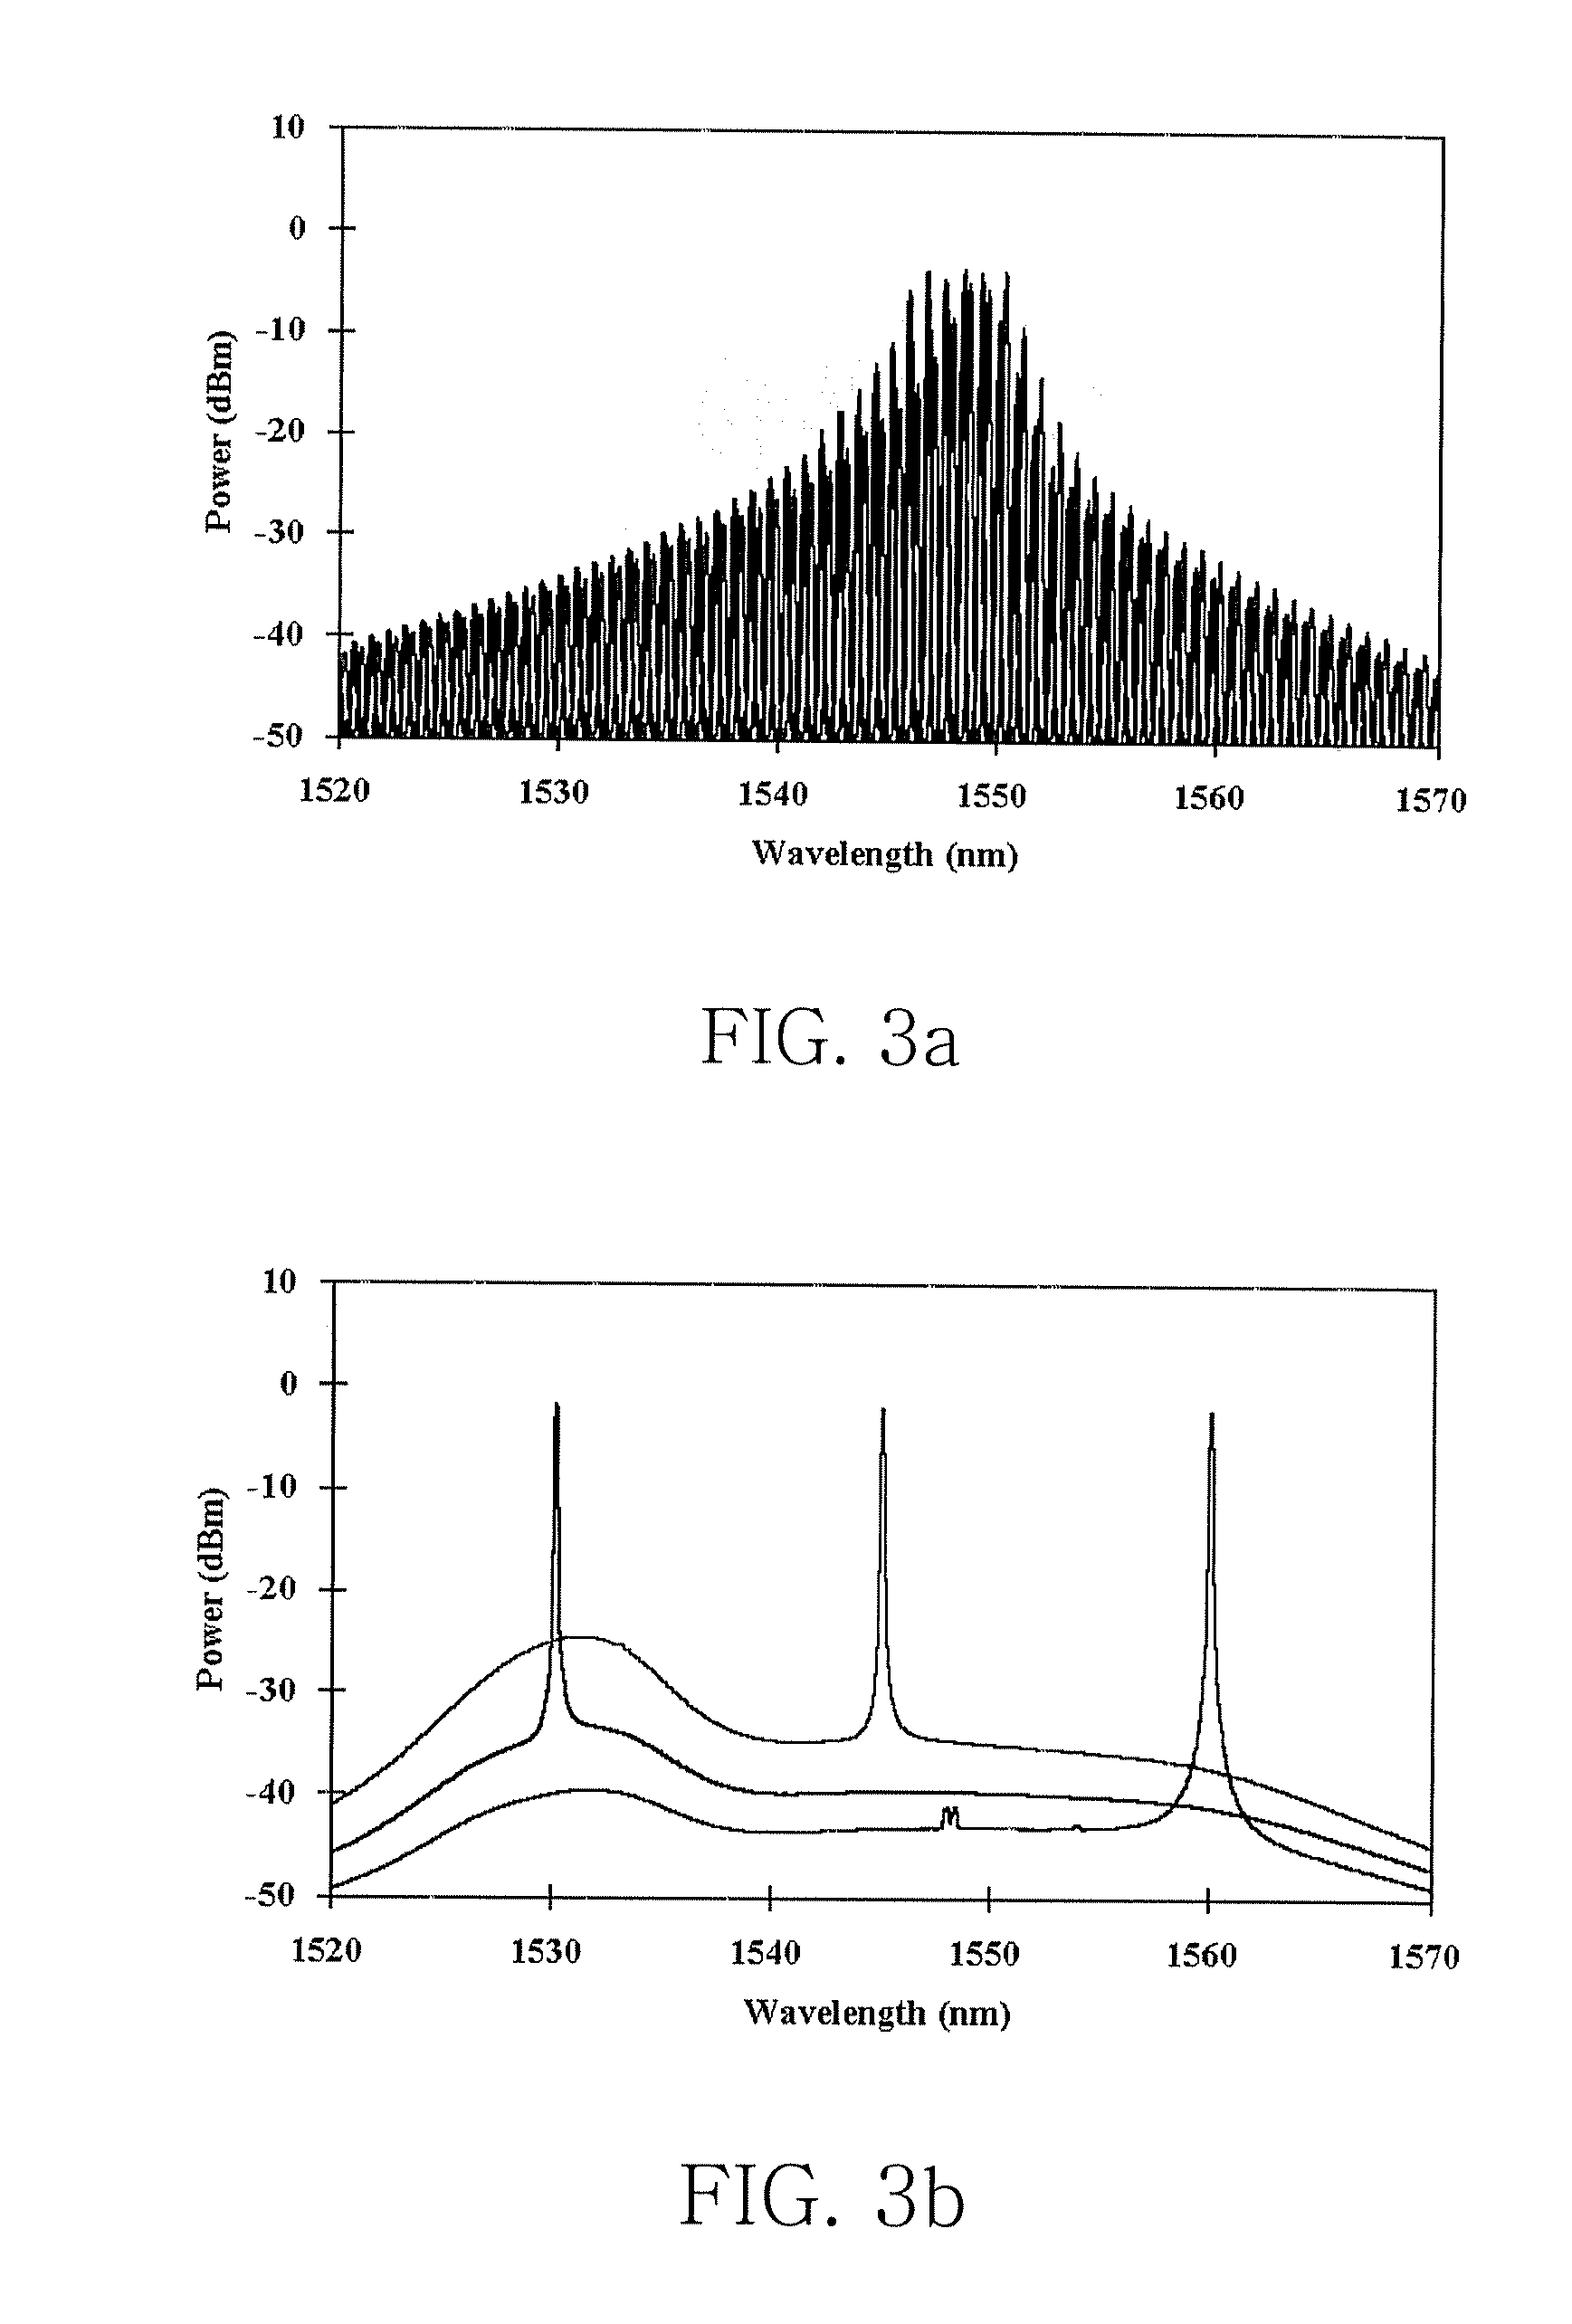 Wavelength-tunable light source and wavelength-division multiplexed transmission system using the source